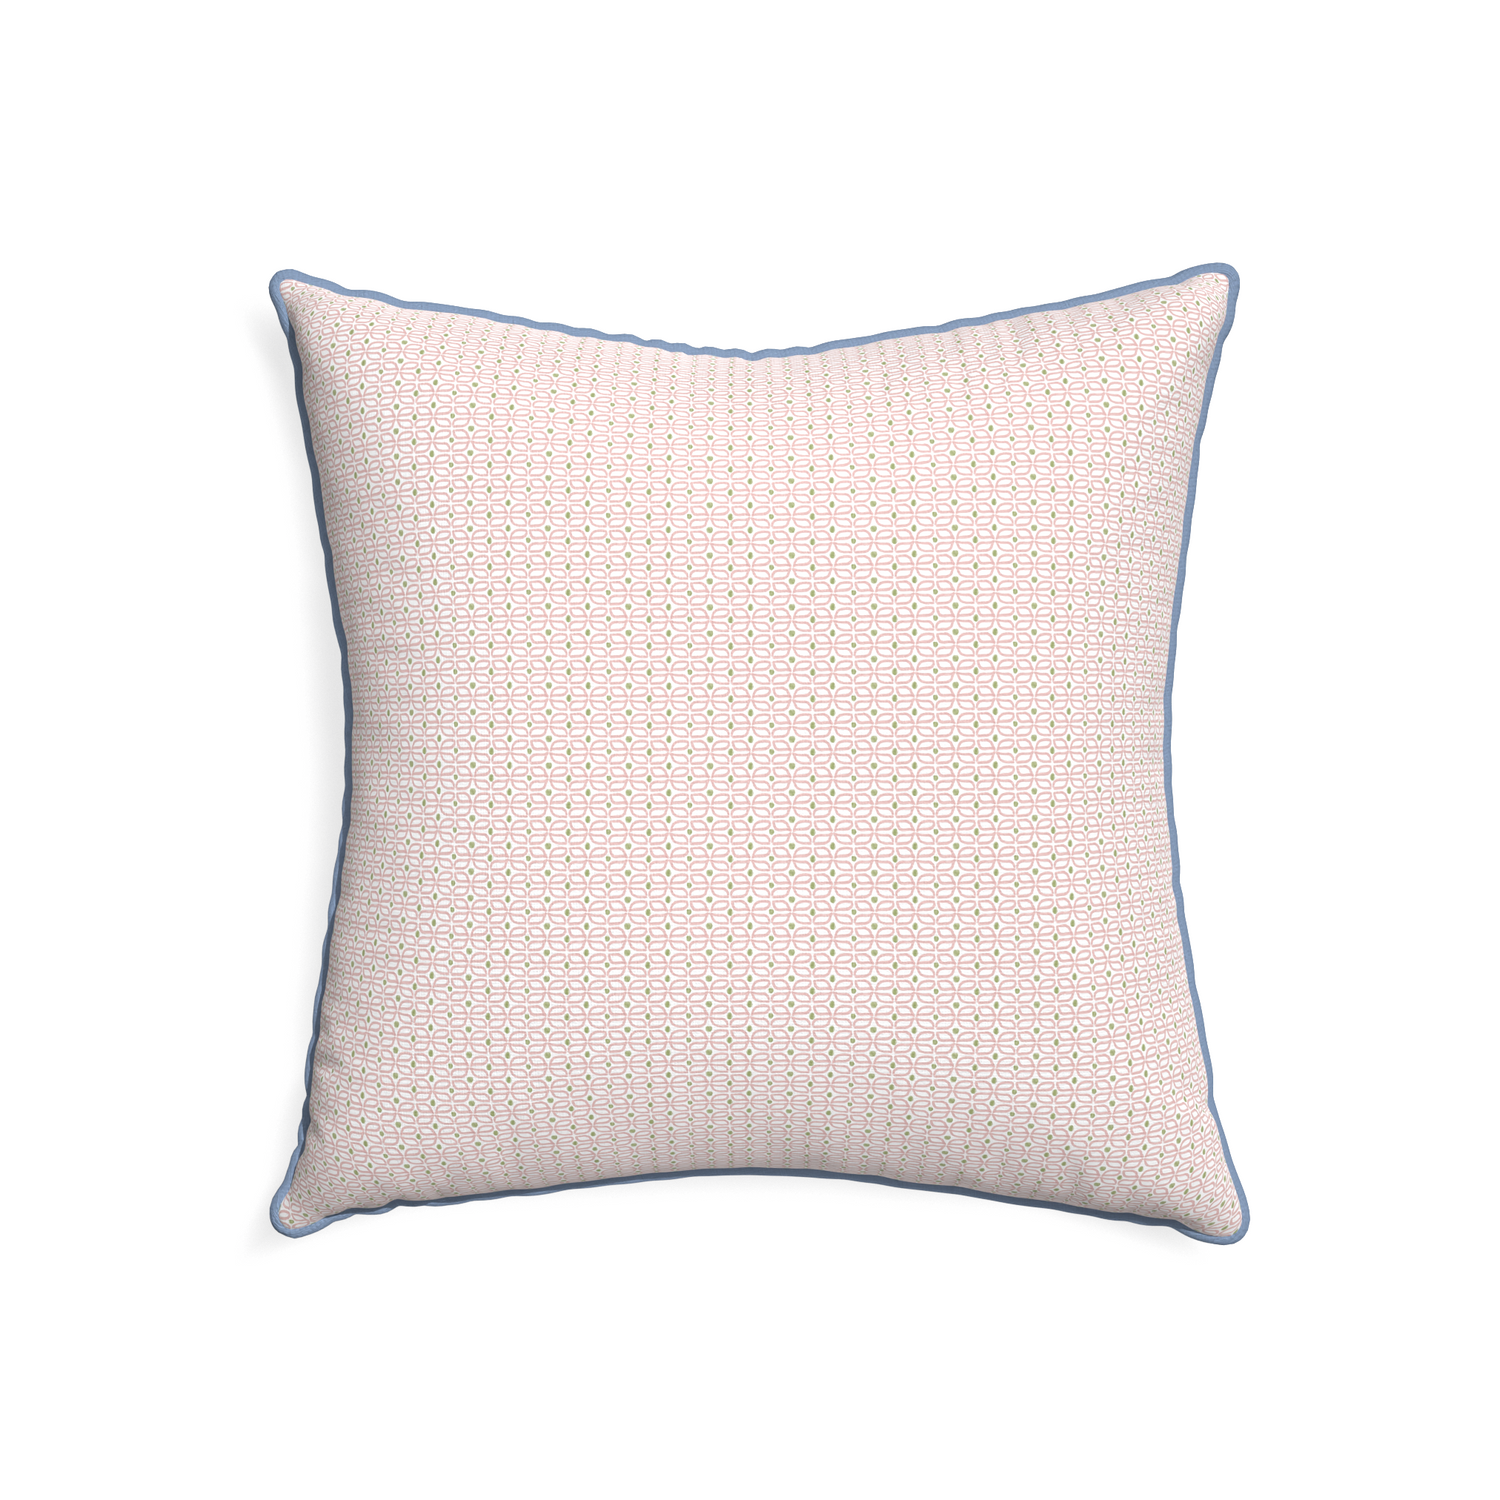 22-square loomi pink custom pillow with sky piping on white background